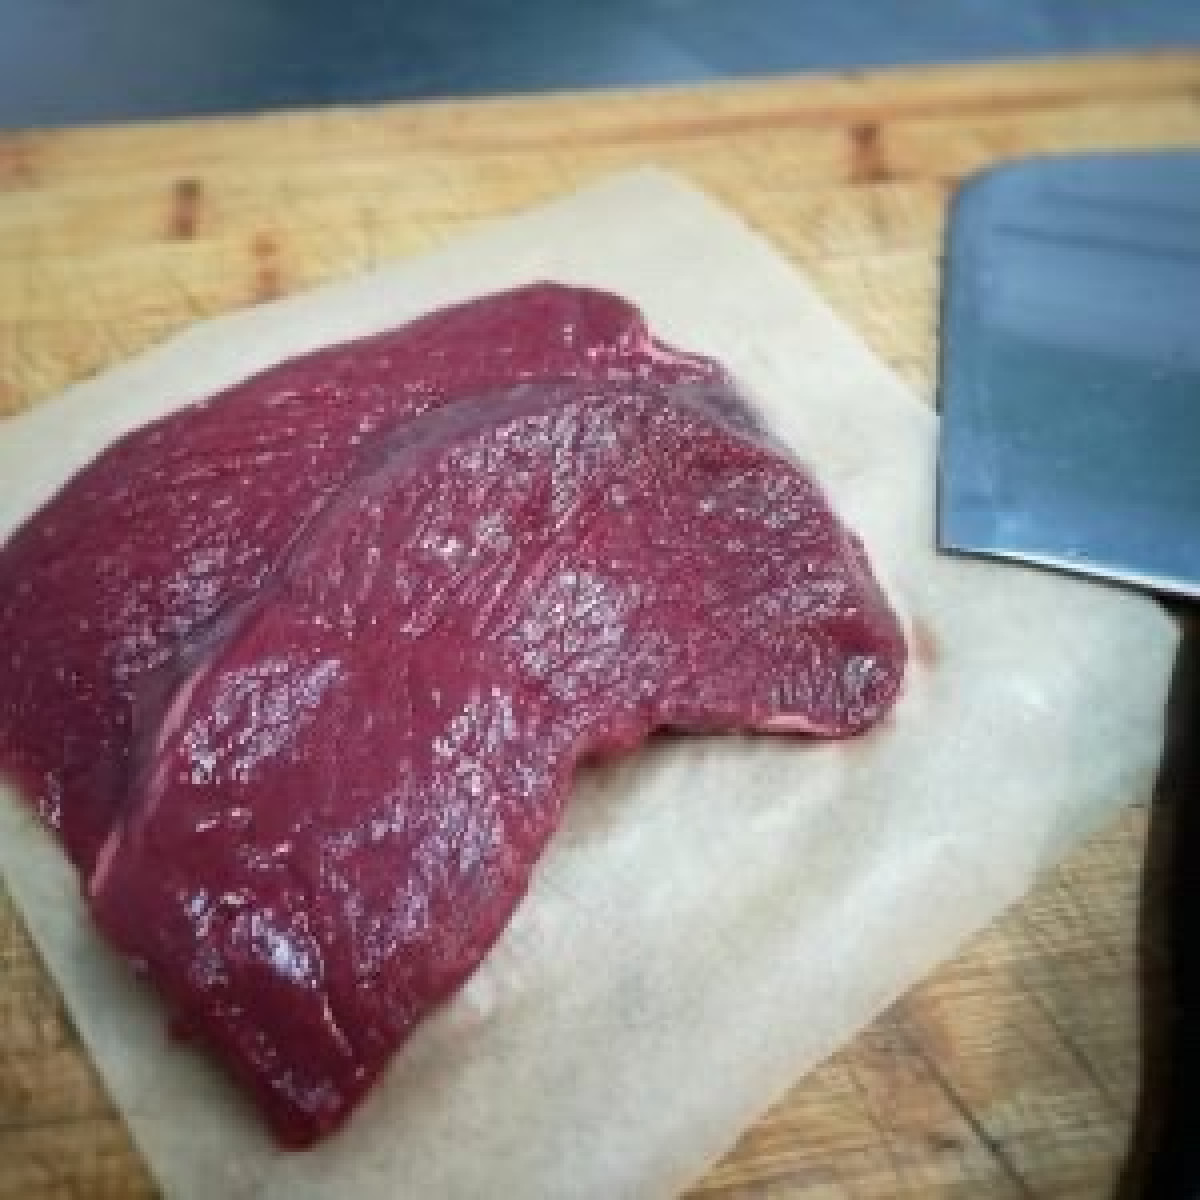 Product picture for Venison haunch steaks